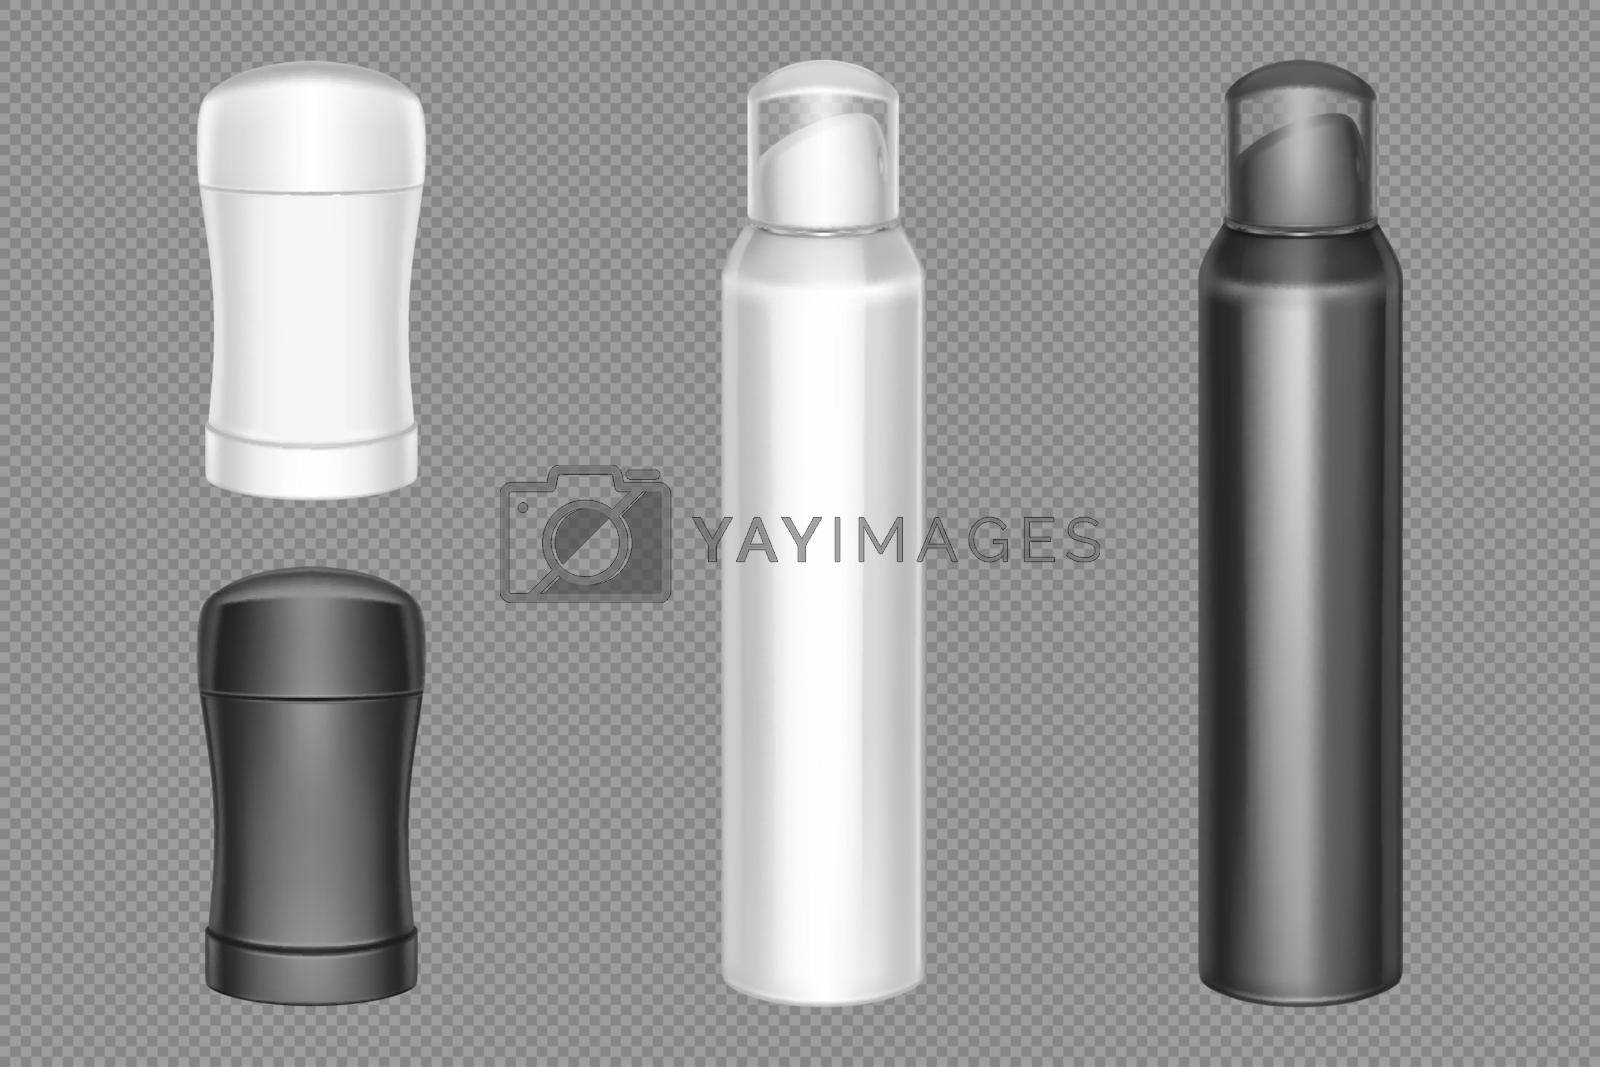 Royalty free image of Spray and deodorant stick packaging mockup by vectorart